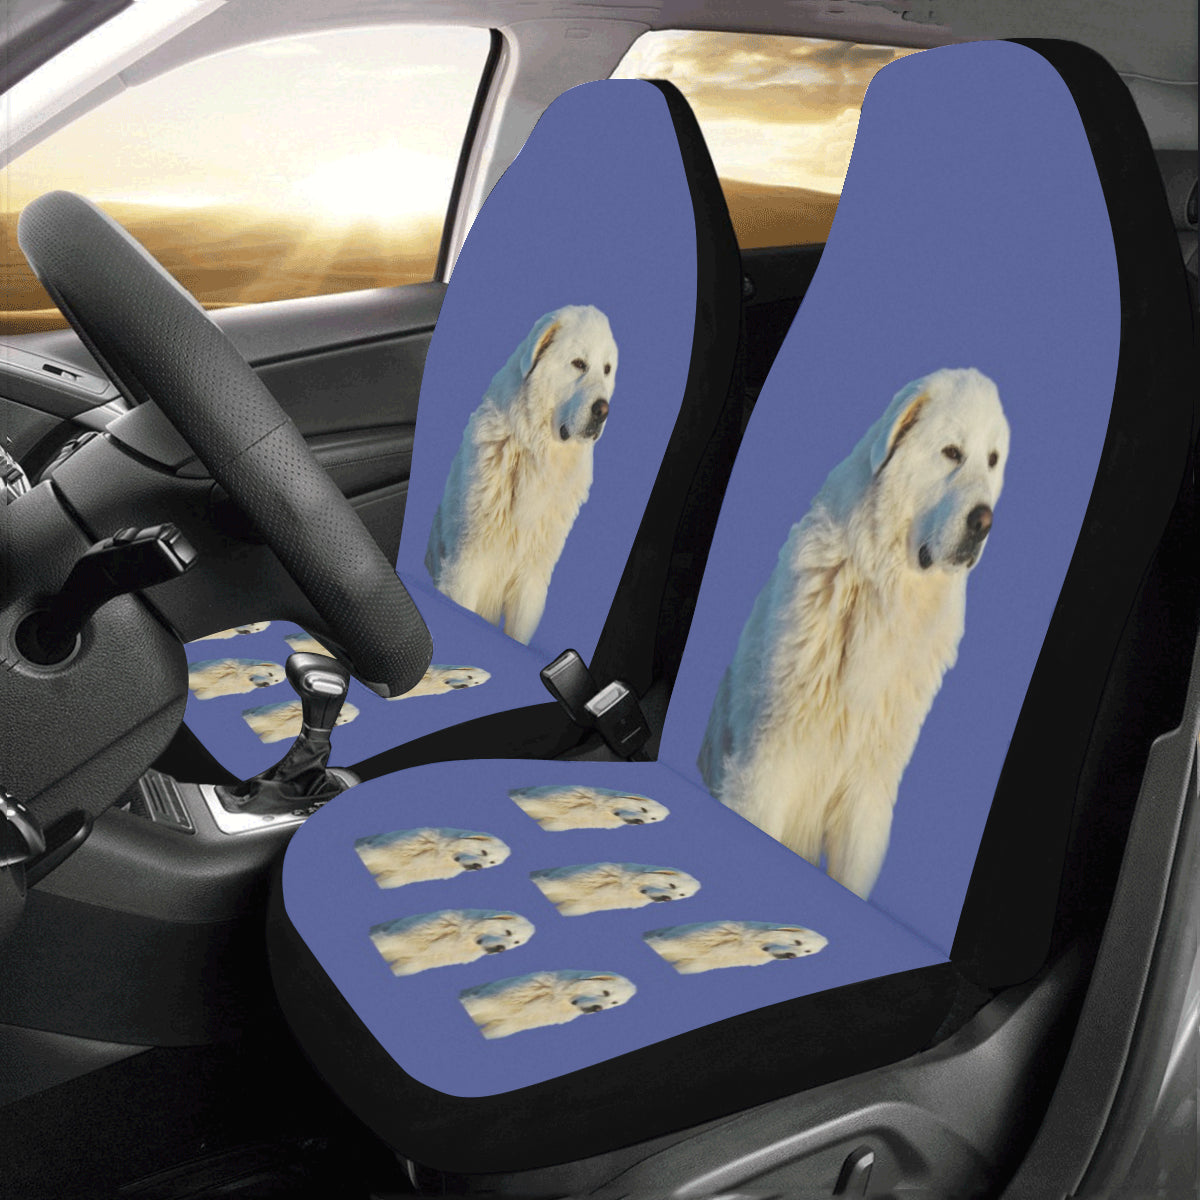 Great Pyrenees Car Seat Covers (Set of 2)